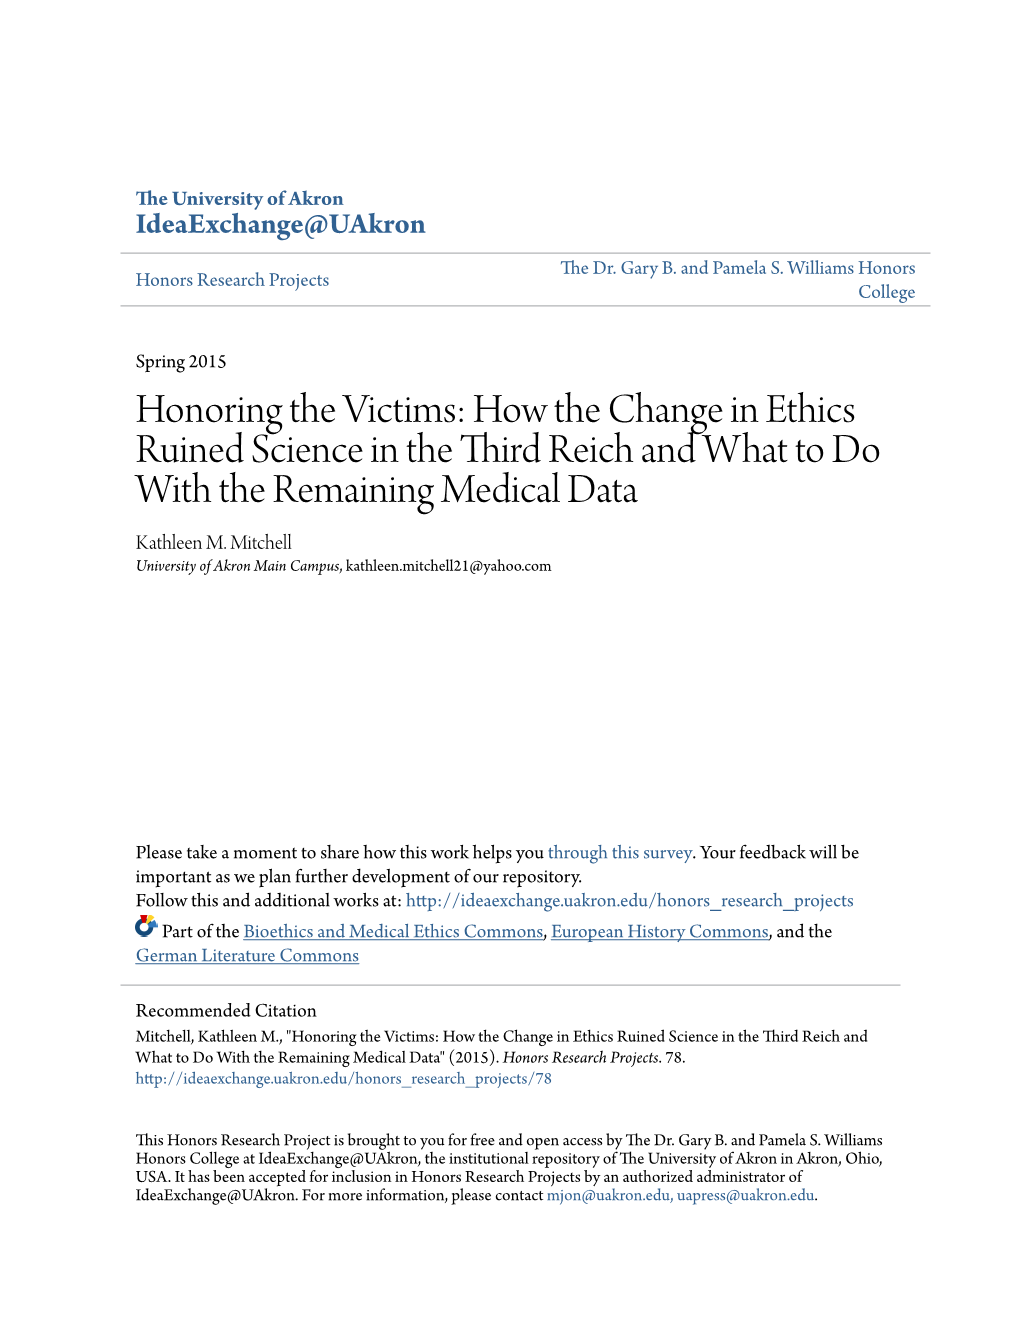 Honoring the Victims: How the Change in Ethics Ruined Science in the Third Reich and What to Do with the Remaining Medical Data Kathleen M